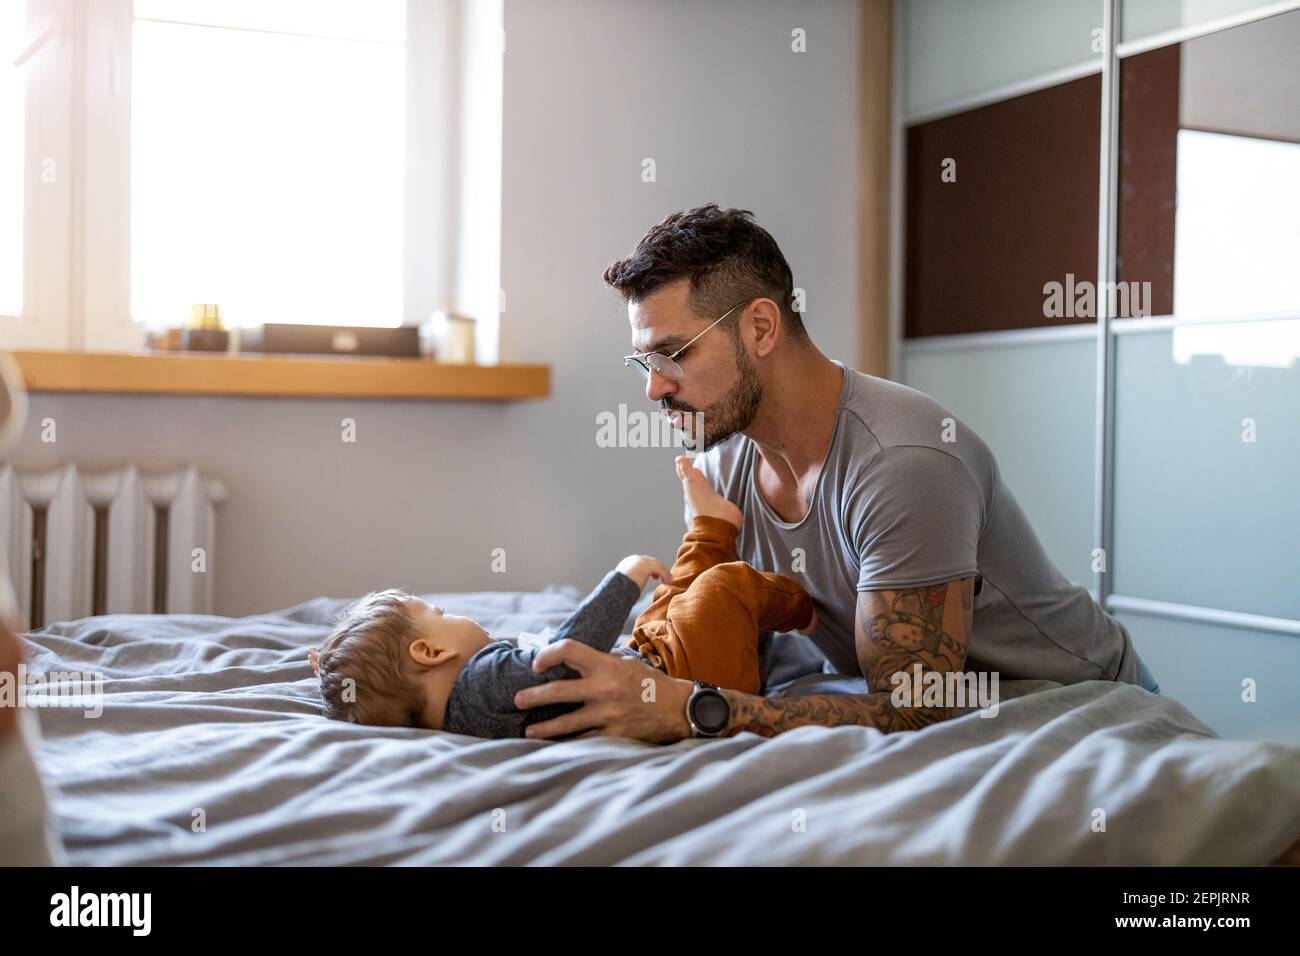 Father looking after his small son at home Stock Photo